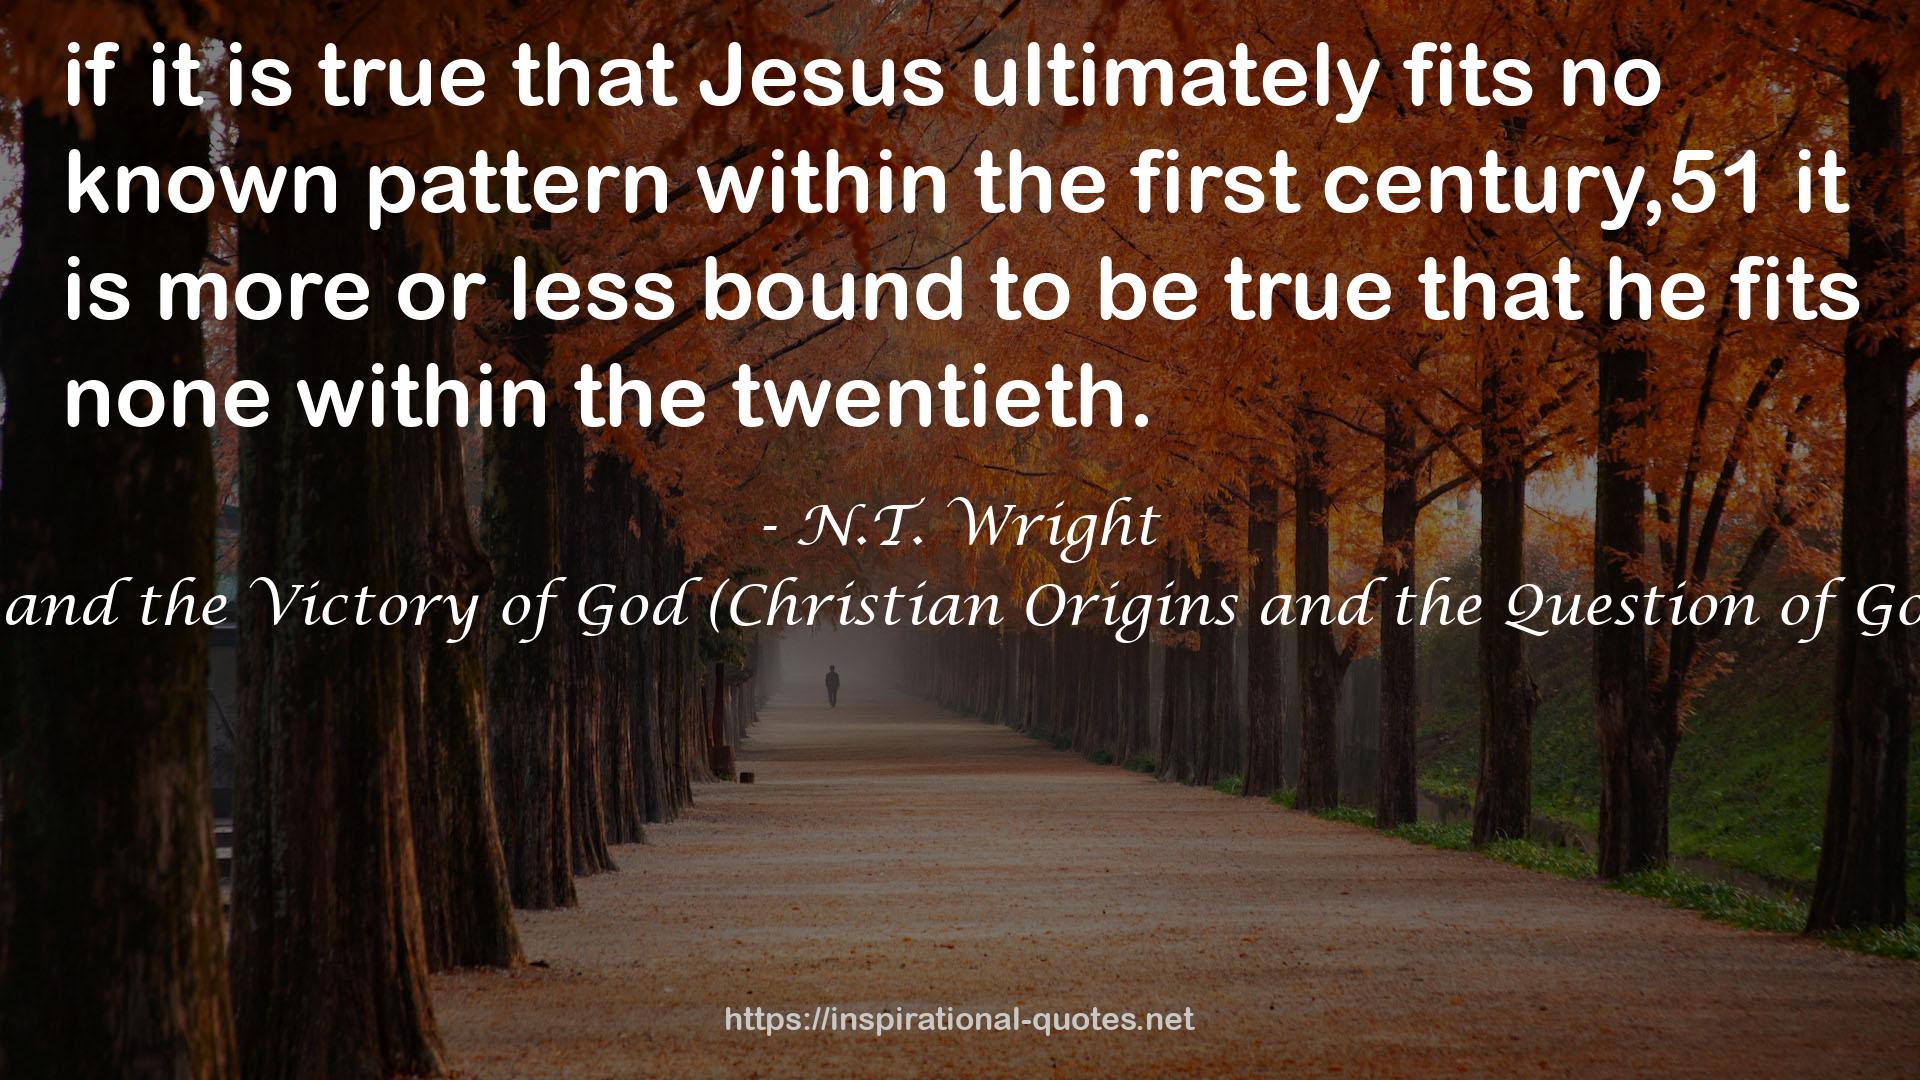 Jesus and the Victory of God (Christian Origins and the Question of God, #2) QUOTES